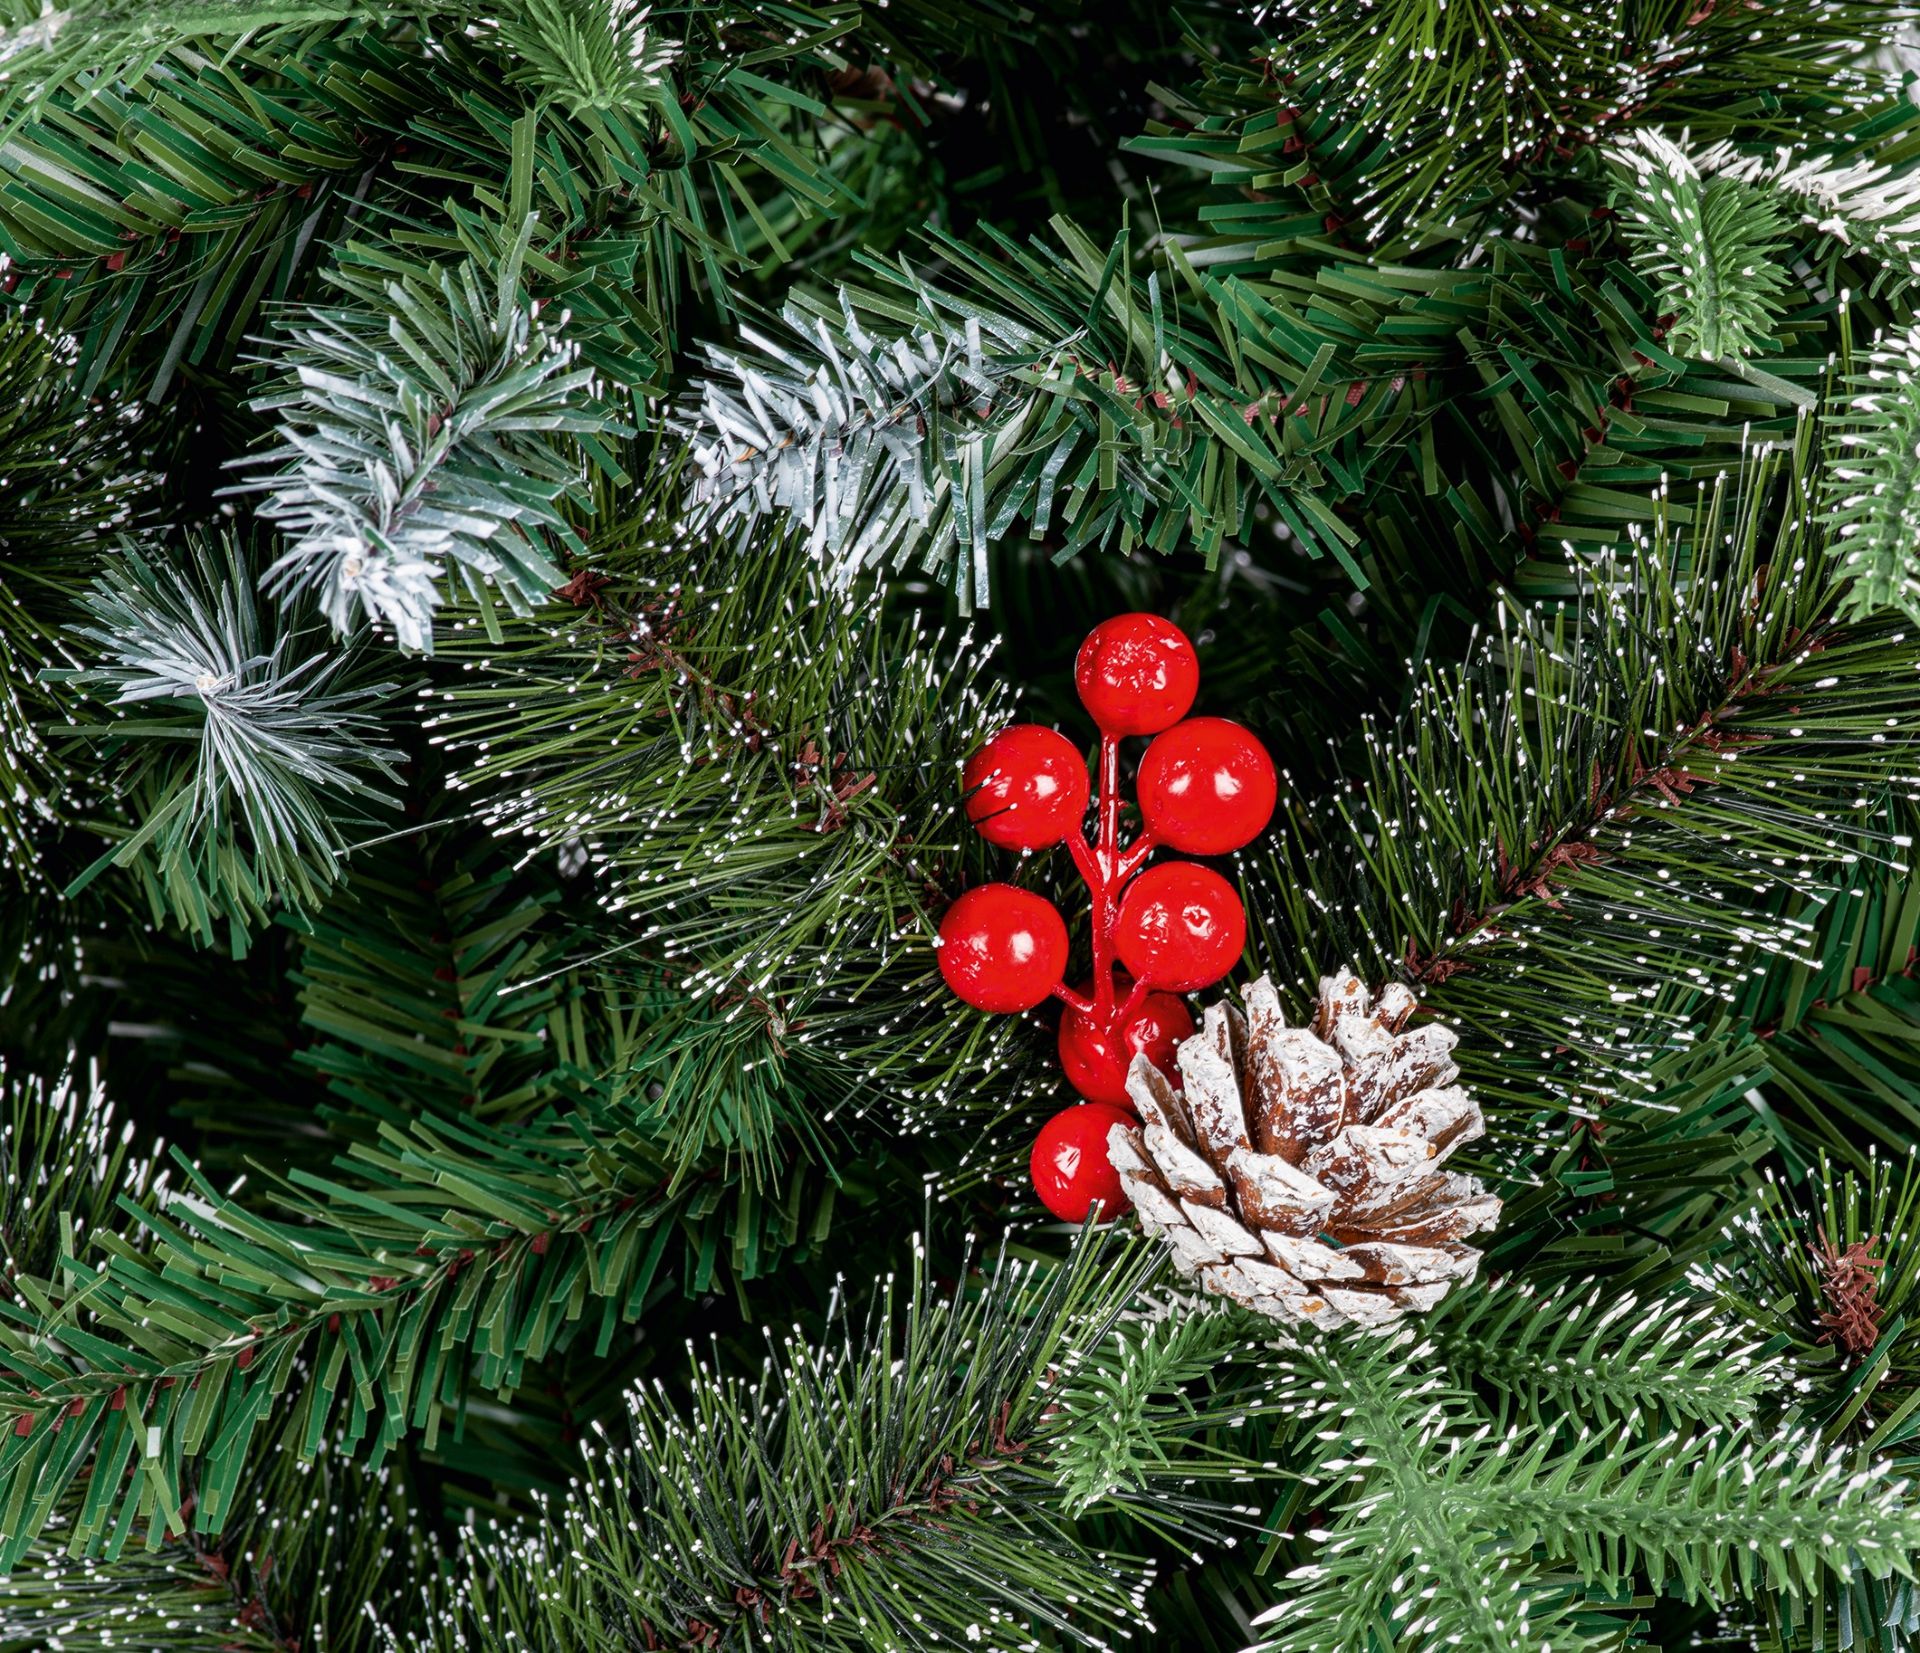 New Premier 1.8m Slim New Jersey Spruce Christmas Tree - PE/PVC w Cones and Berries - Image 2 of 6